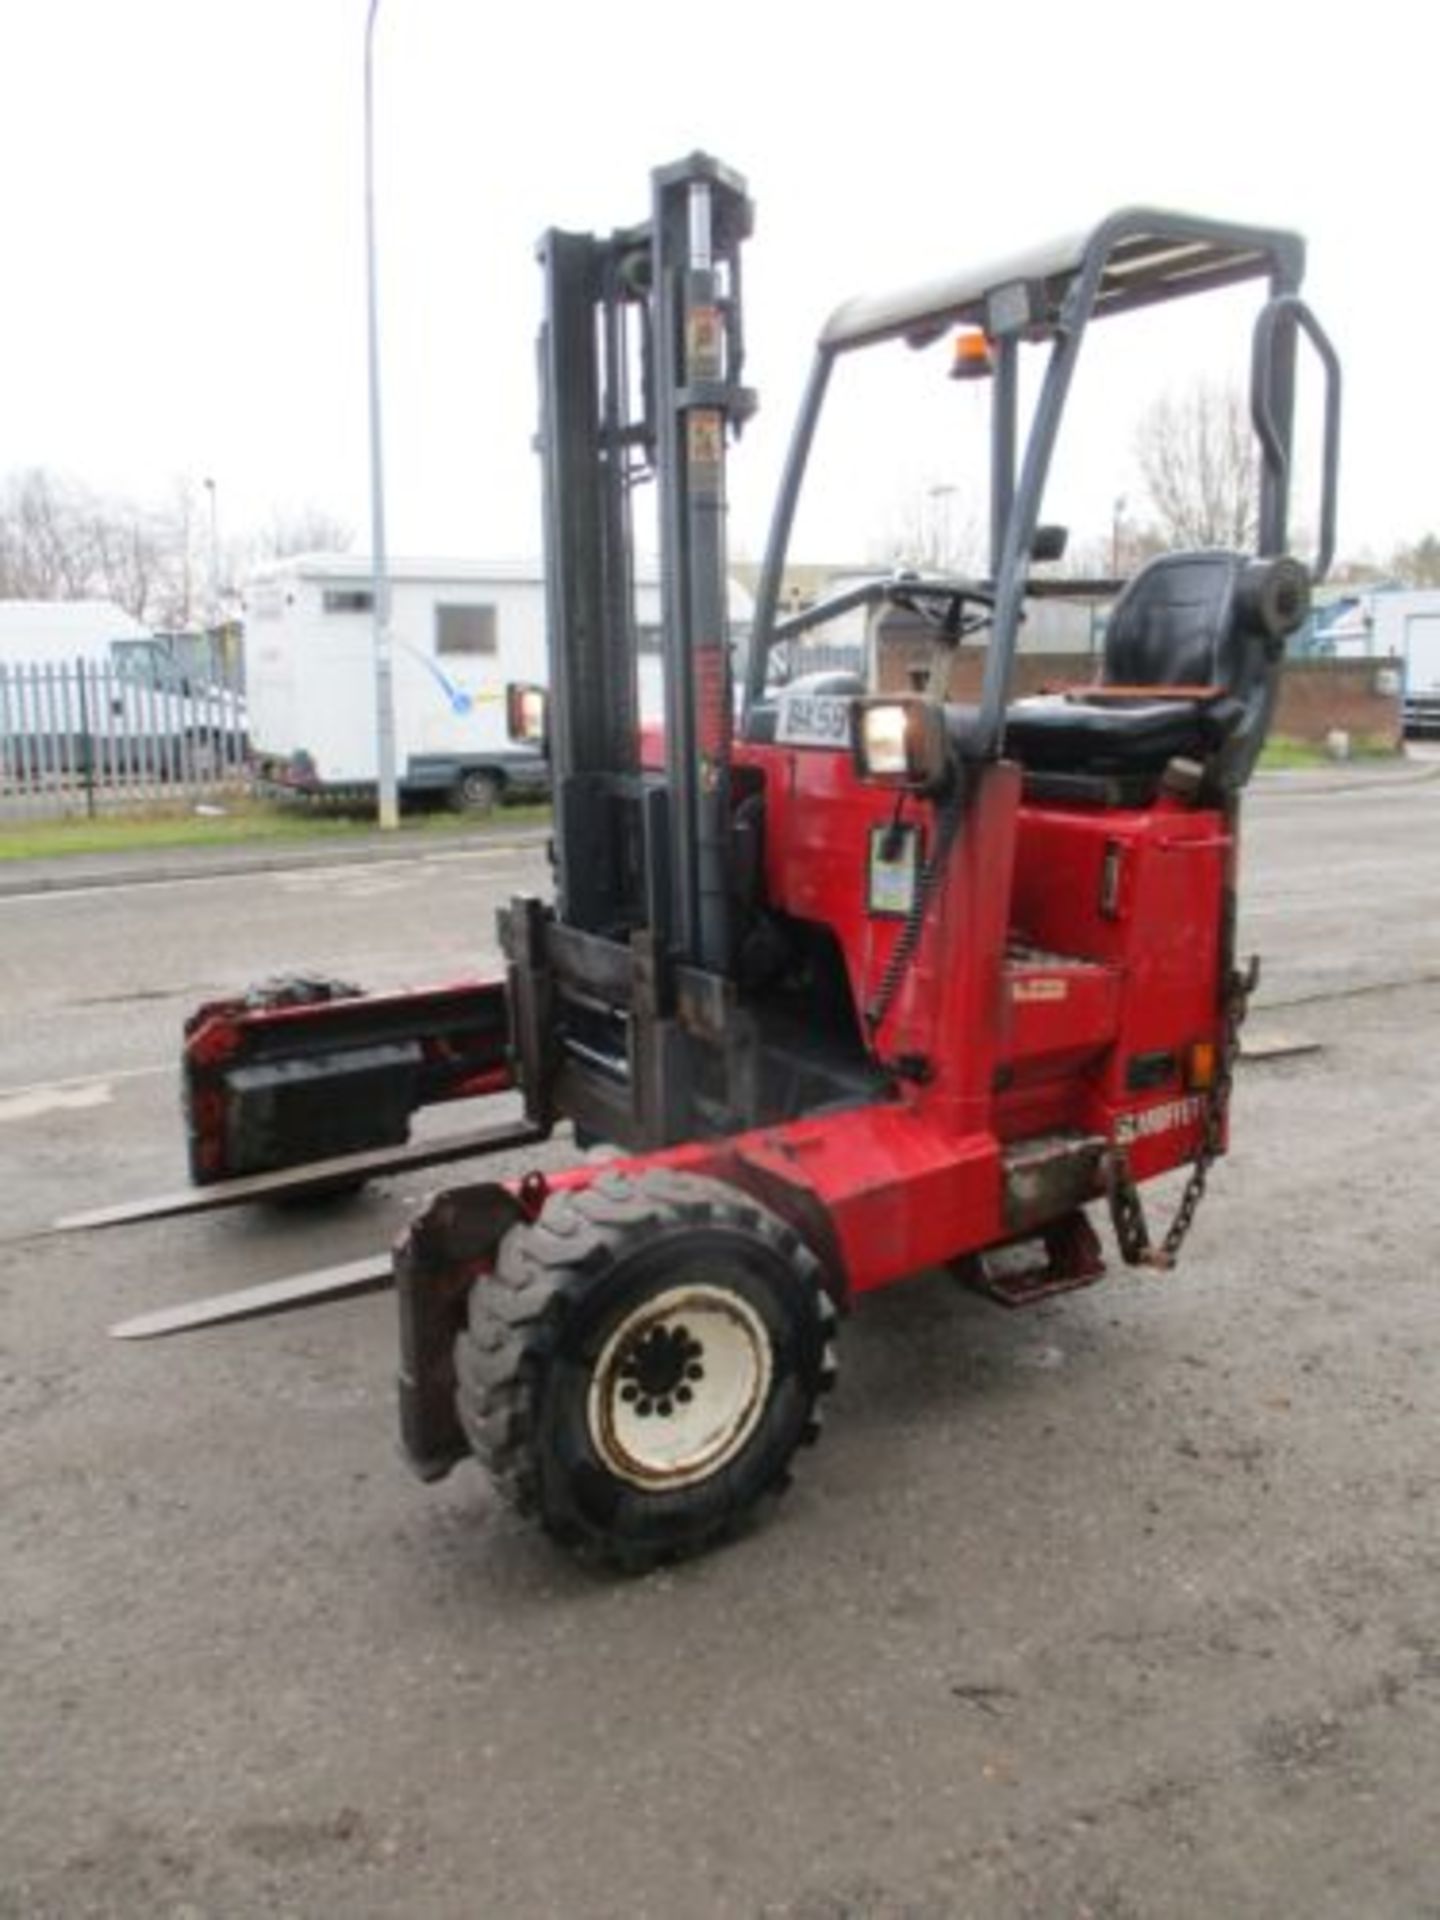 2009 MOFFETT MOUNTY M5 20.3 FORK LIFT FORKLIFT TRUCK MOUNTED LOLER DELIVERY - Image 8 of 8